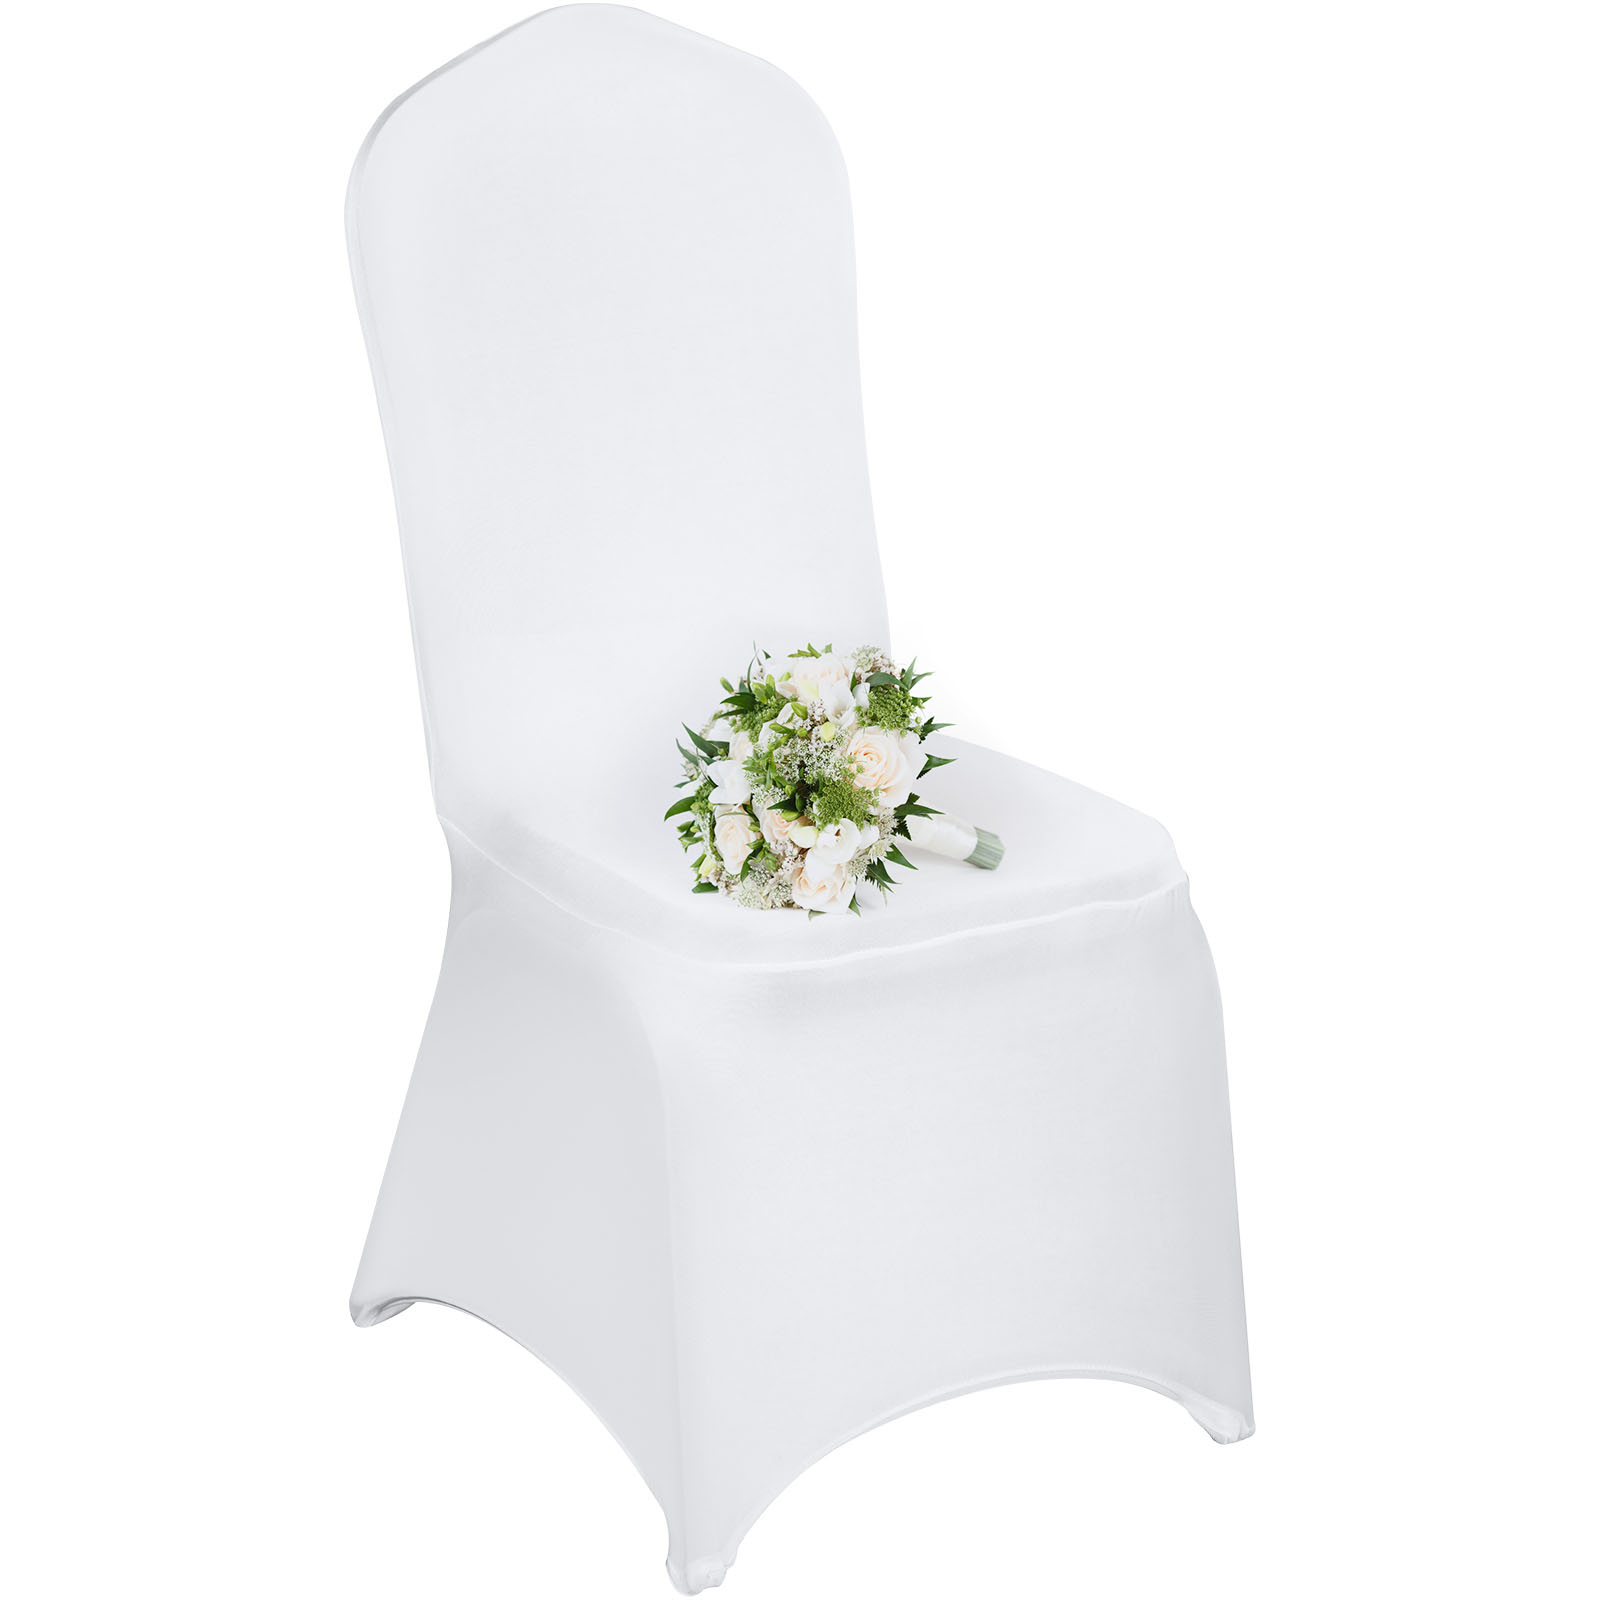 100pcs Spandex Stretch Chair Covers White For Wedding Party Banquet Decoration от Vevor Many GEOs